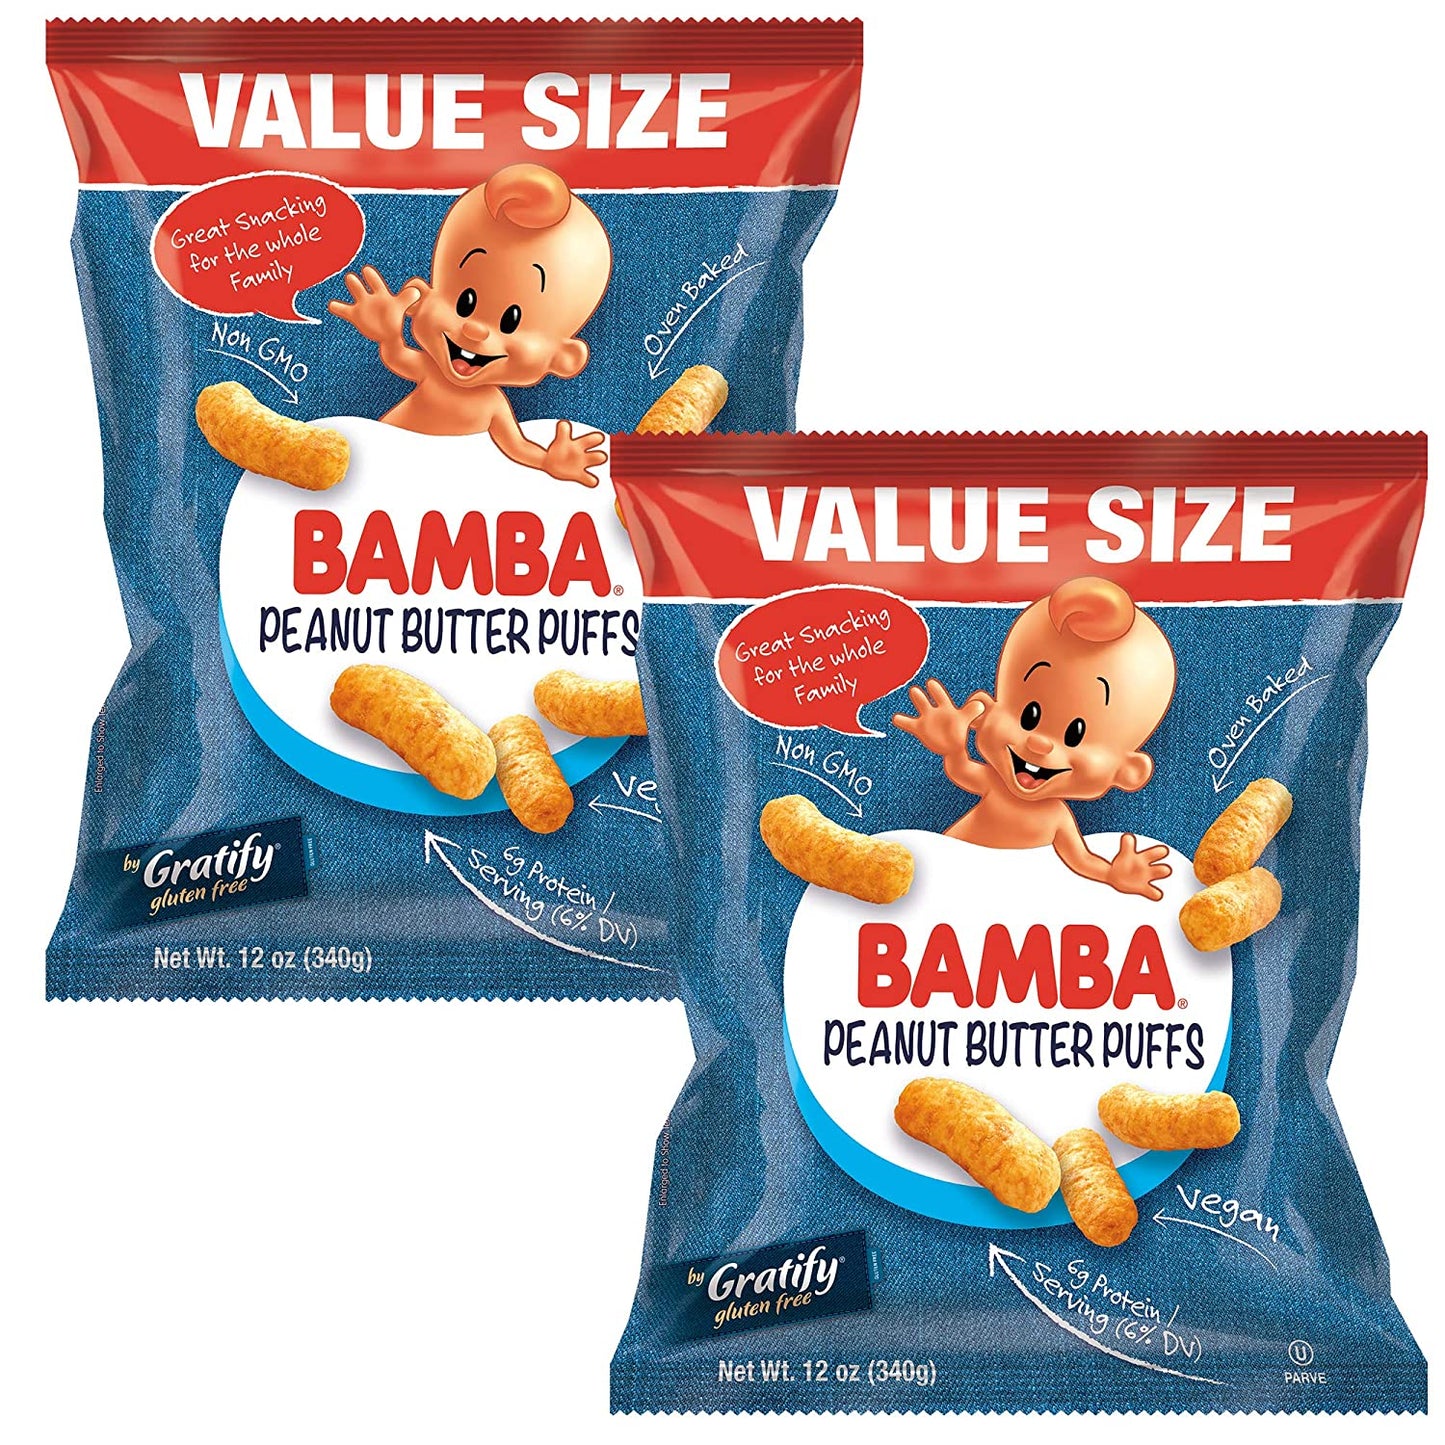 Gratify Bamba Peanut Butter Snacks for Families - All Natural Peanut Butter Puffs Value Size ( 2 pack - 12oz Bags) - Peanut Butter Puffs made with 4 Simple Ingredients. Family Size Bags